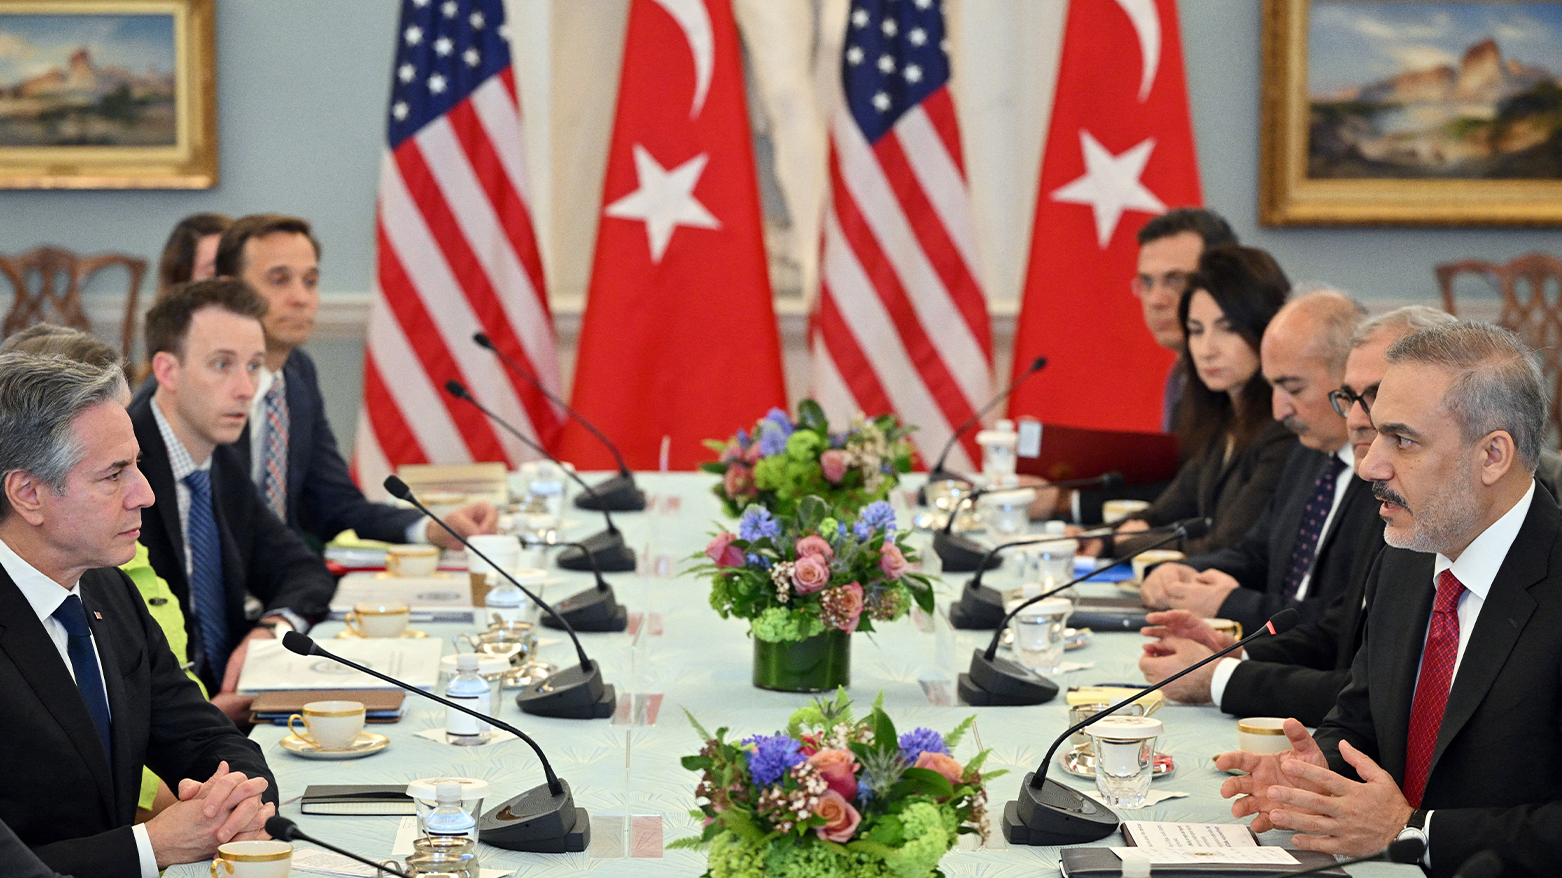 US Secretary of State Antony Blinken (L) takes part in a meeting with Turkey’s Foreign Minister Hakan Fidan (R). (Photo:MANDEL NGAN / AFP)